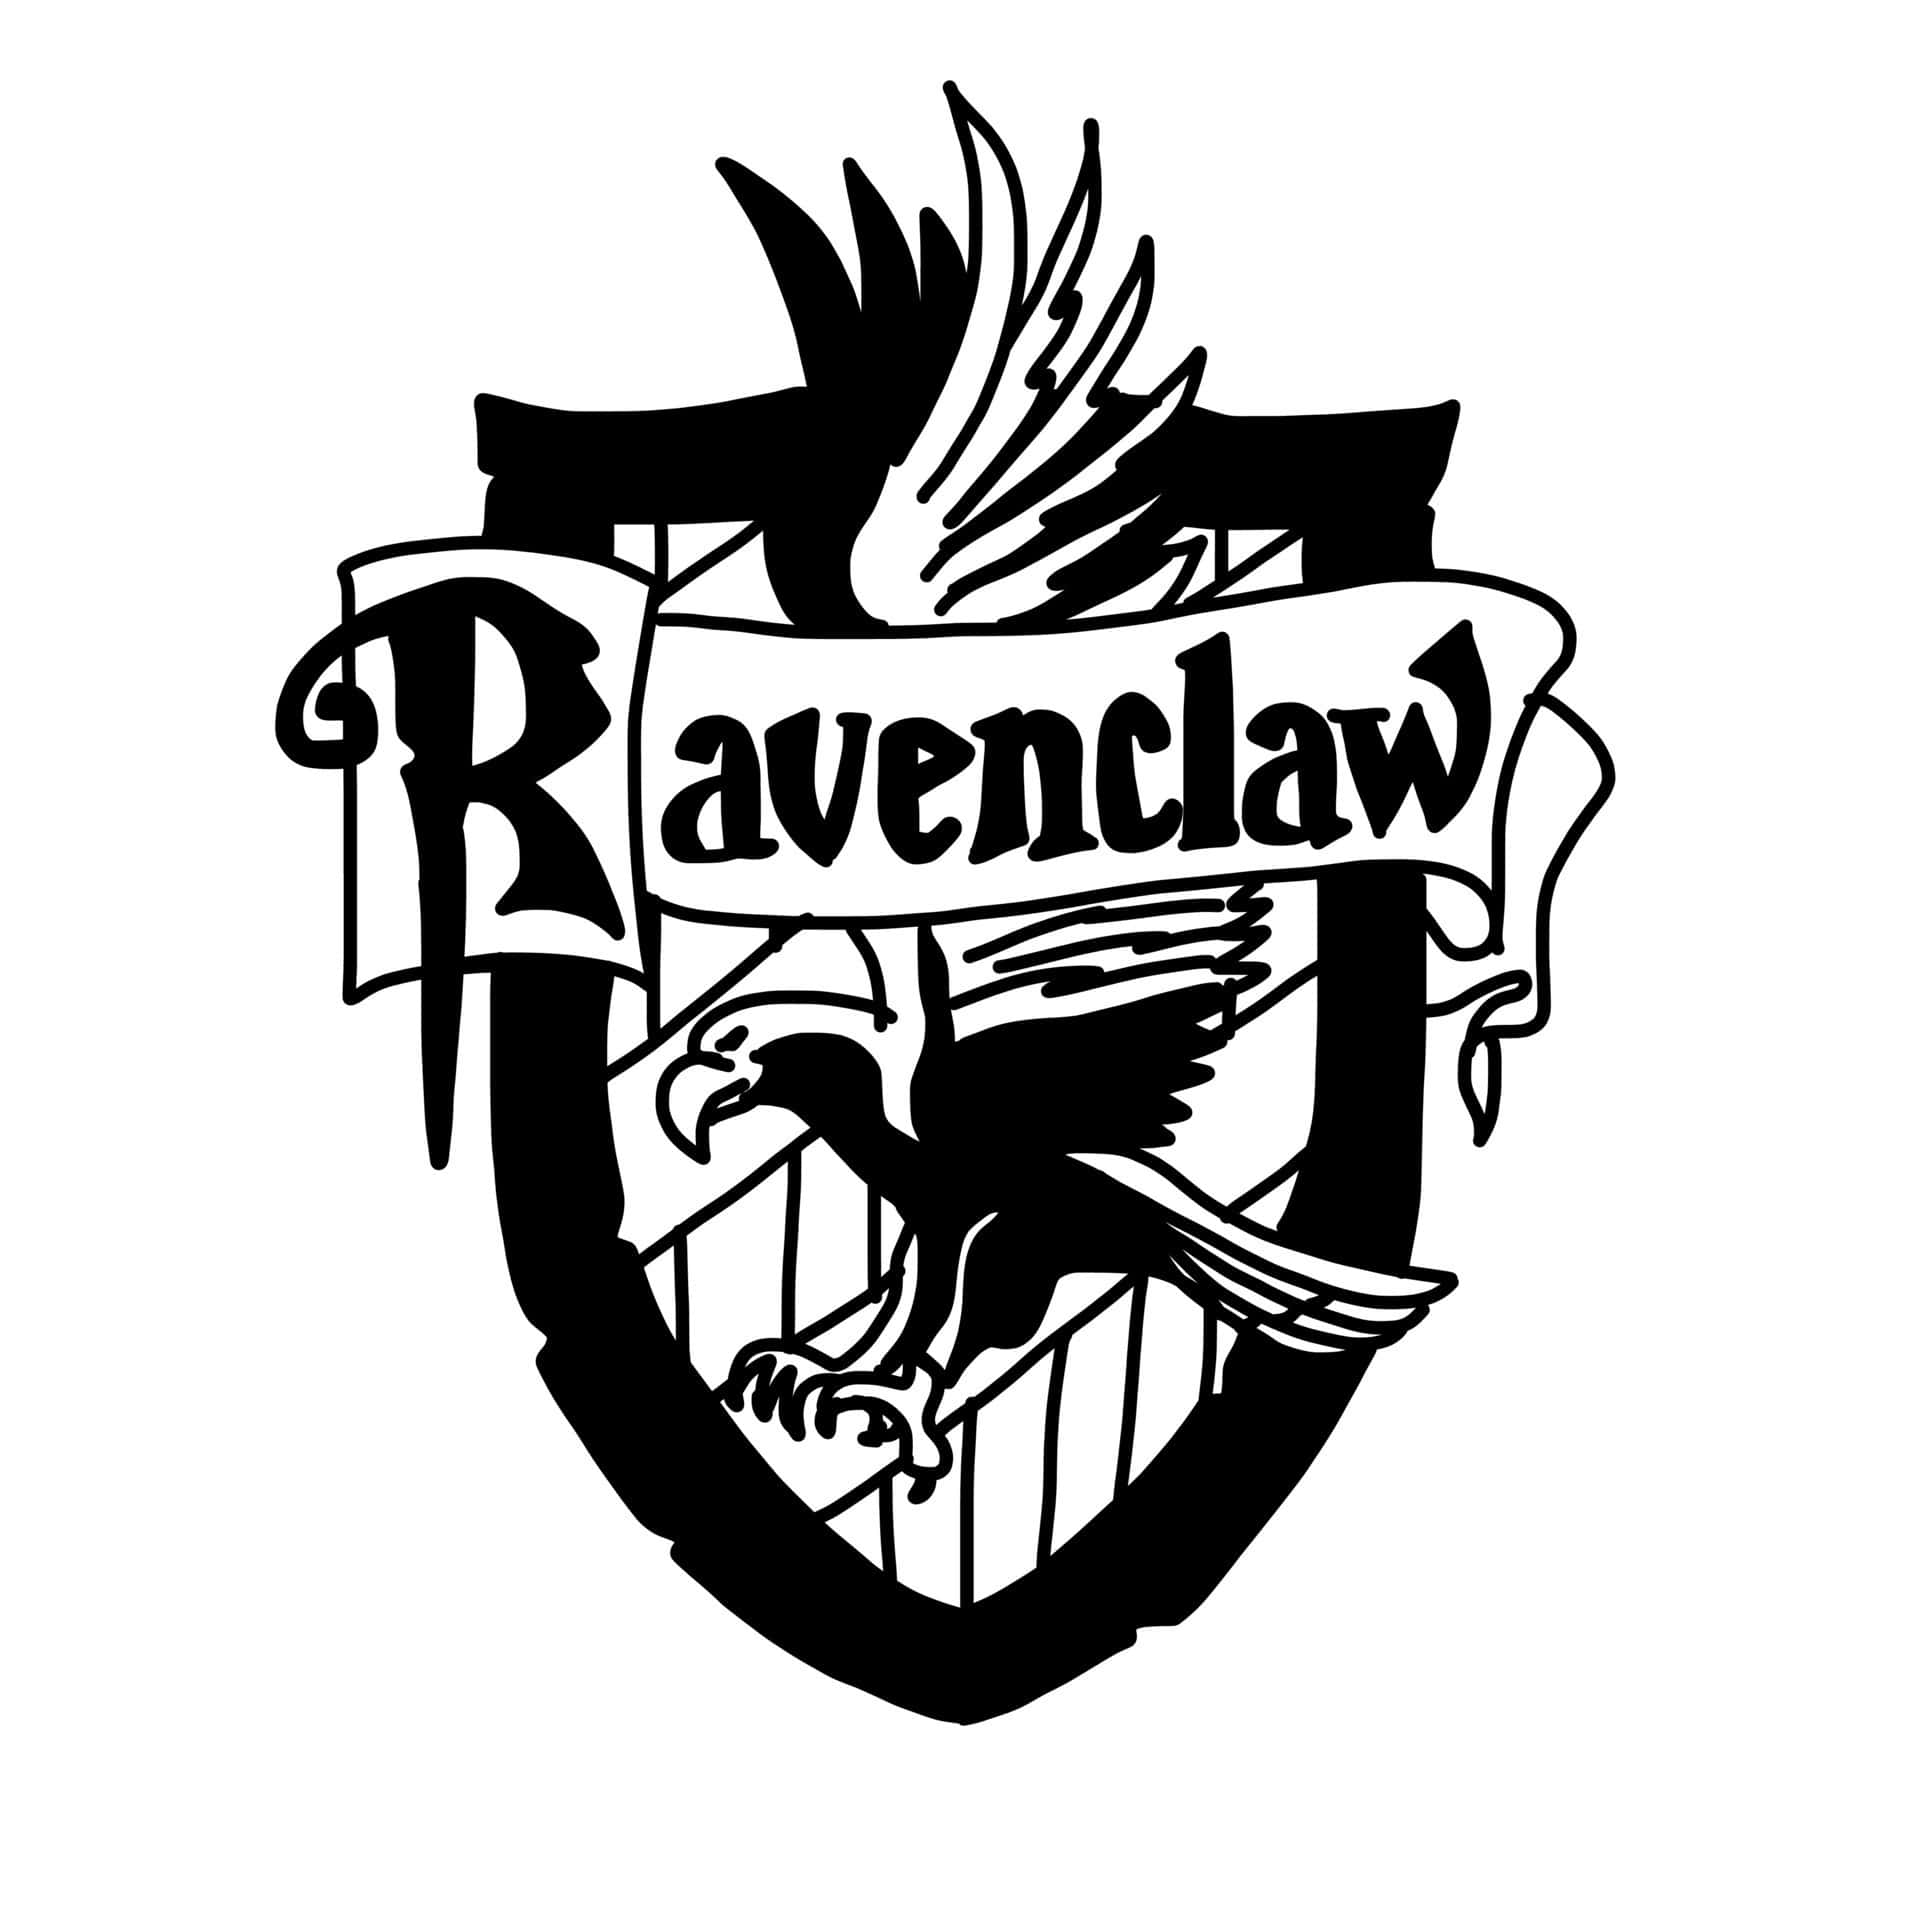 Show your Ravenclaw pride!